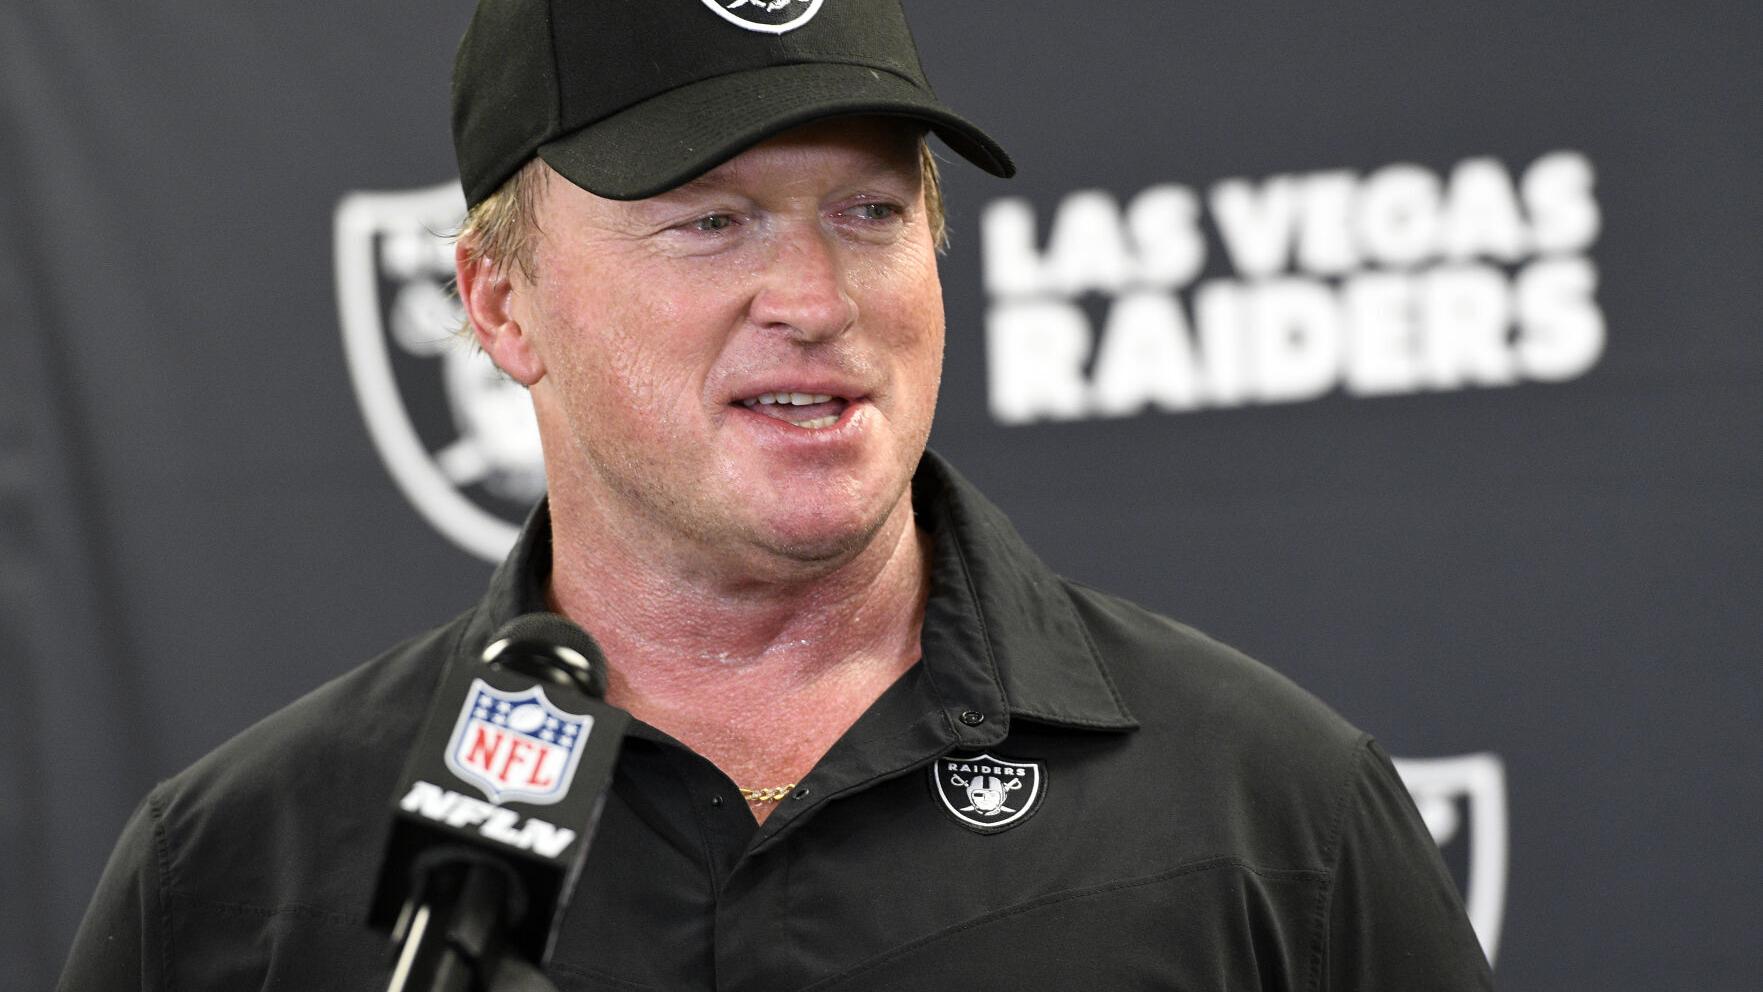 Raiders coach Jon Gruden apologizes after racist email discovered during investigation